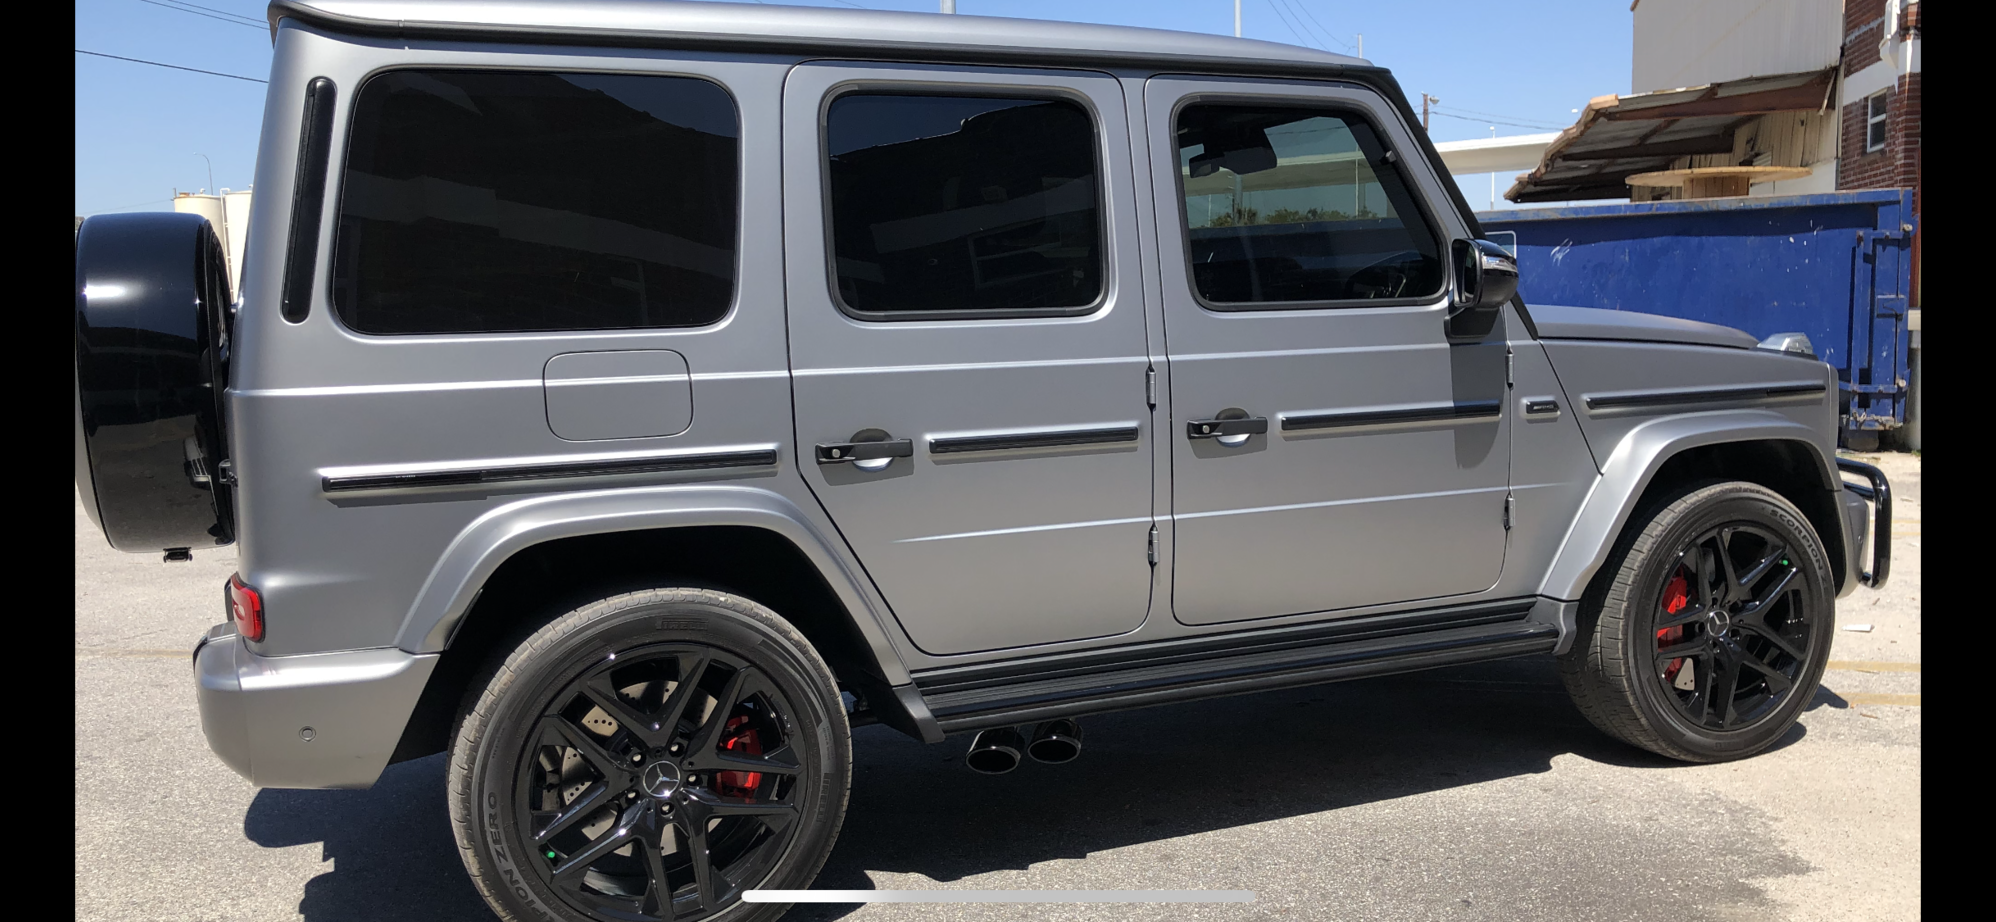 Wheels and Tires/Axles - 2019 G63 OEM 21" Wheels/Tires - Gloss Black - Used - 2019 Mercedes-Benz G63 AMG - Tampa, FL 33602, United States